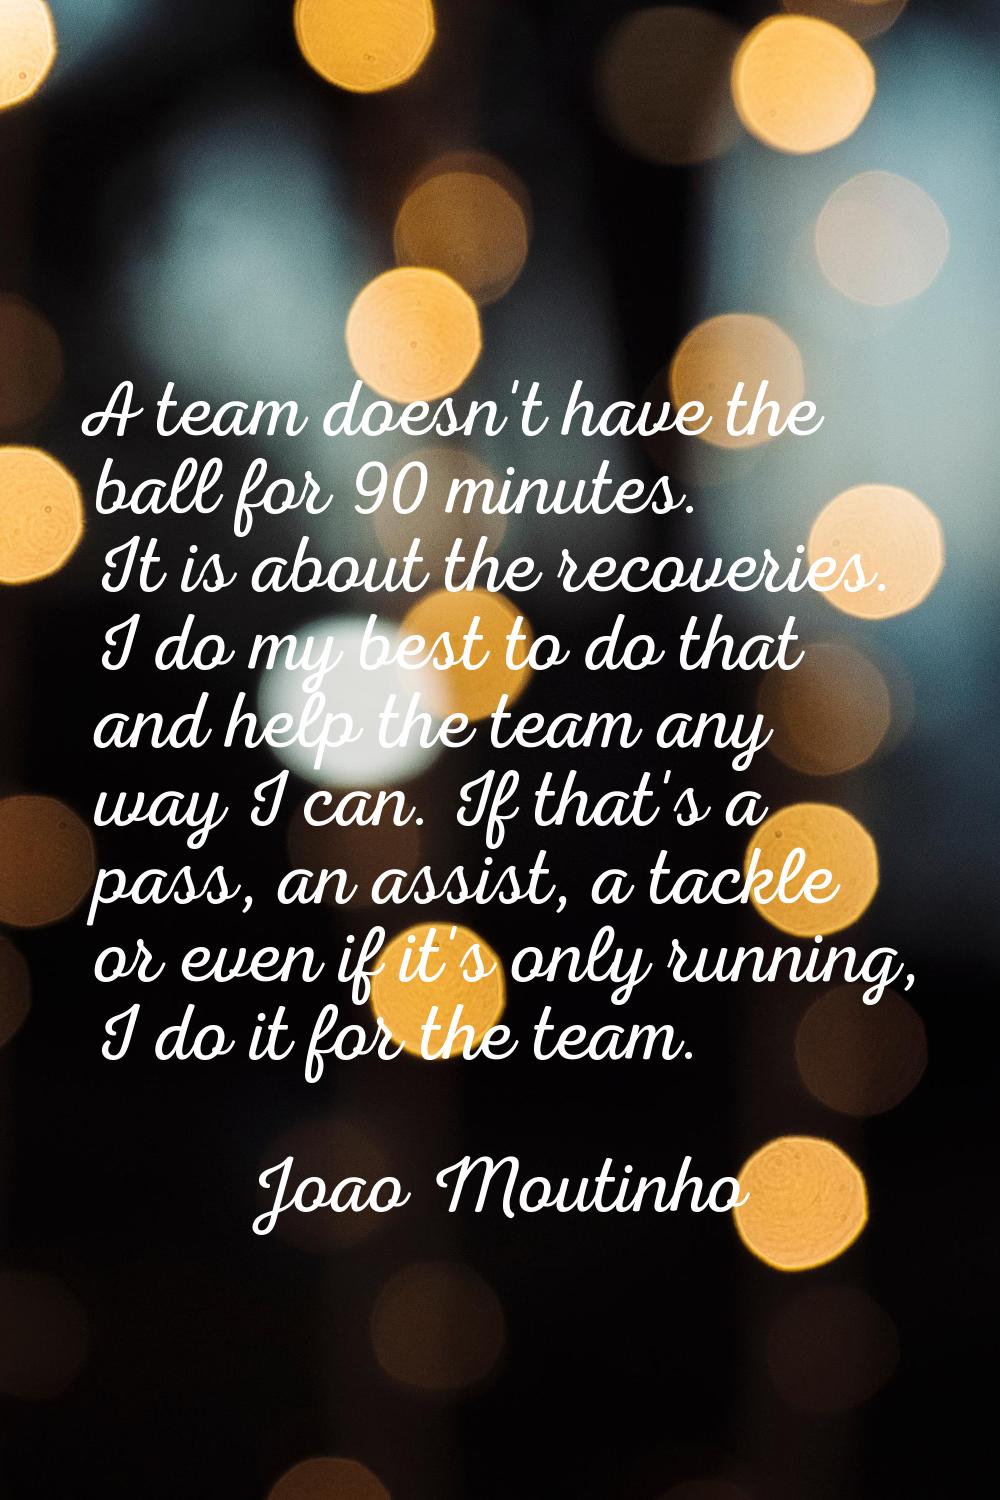 A team doesn't have the ball for 90 minutes. It is about the recoveries. I do my best to do that an